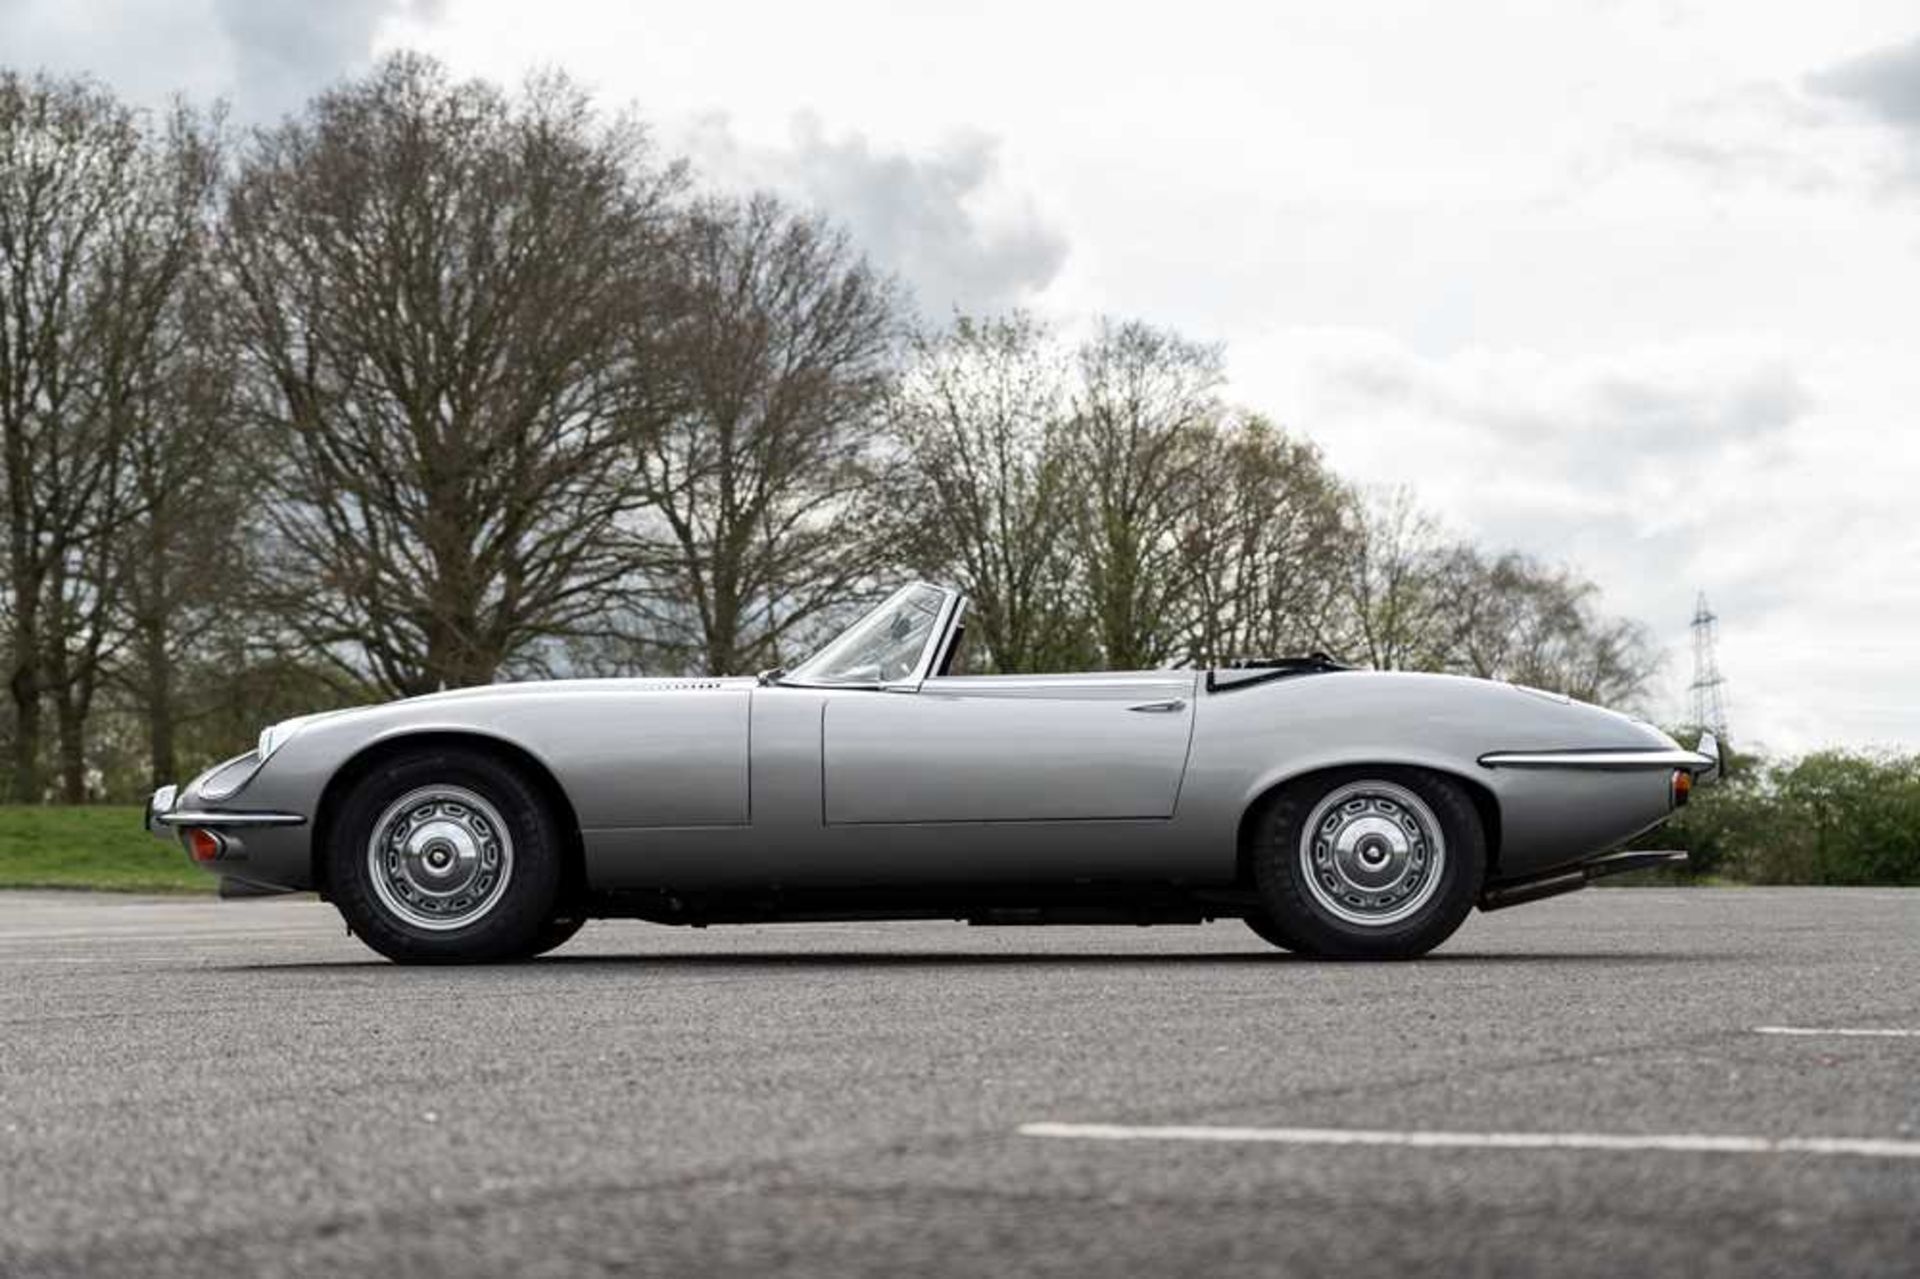 1974 Jaguar E-Type Series III V12 Roadster Only one family owner and 54,412 miles from new - Image 3 of 89